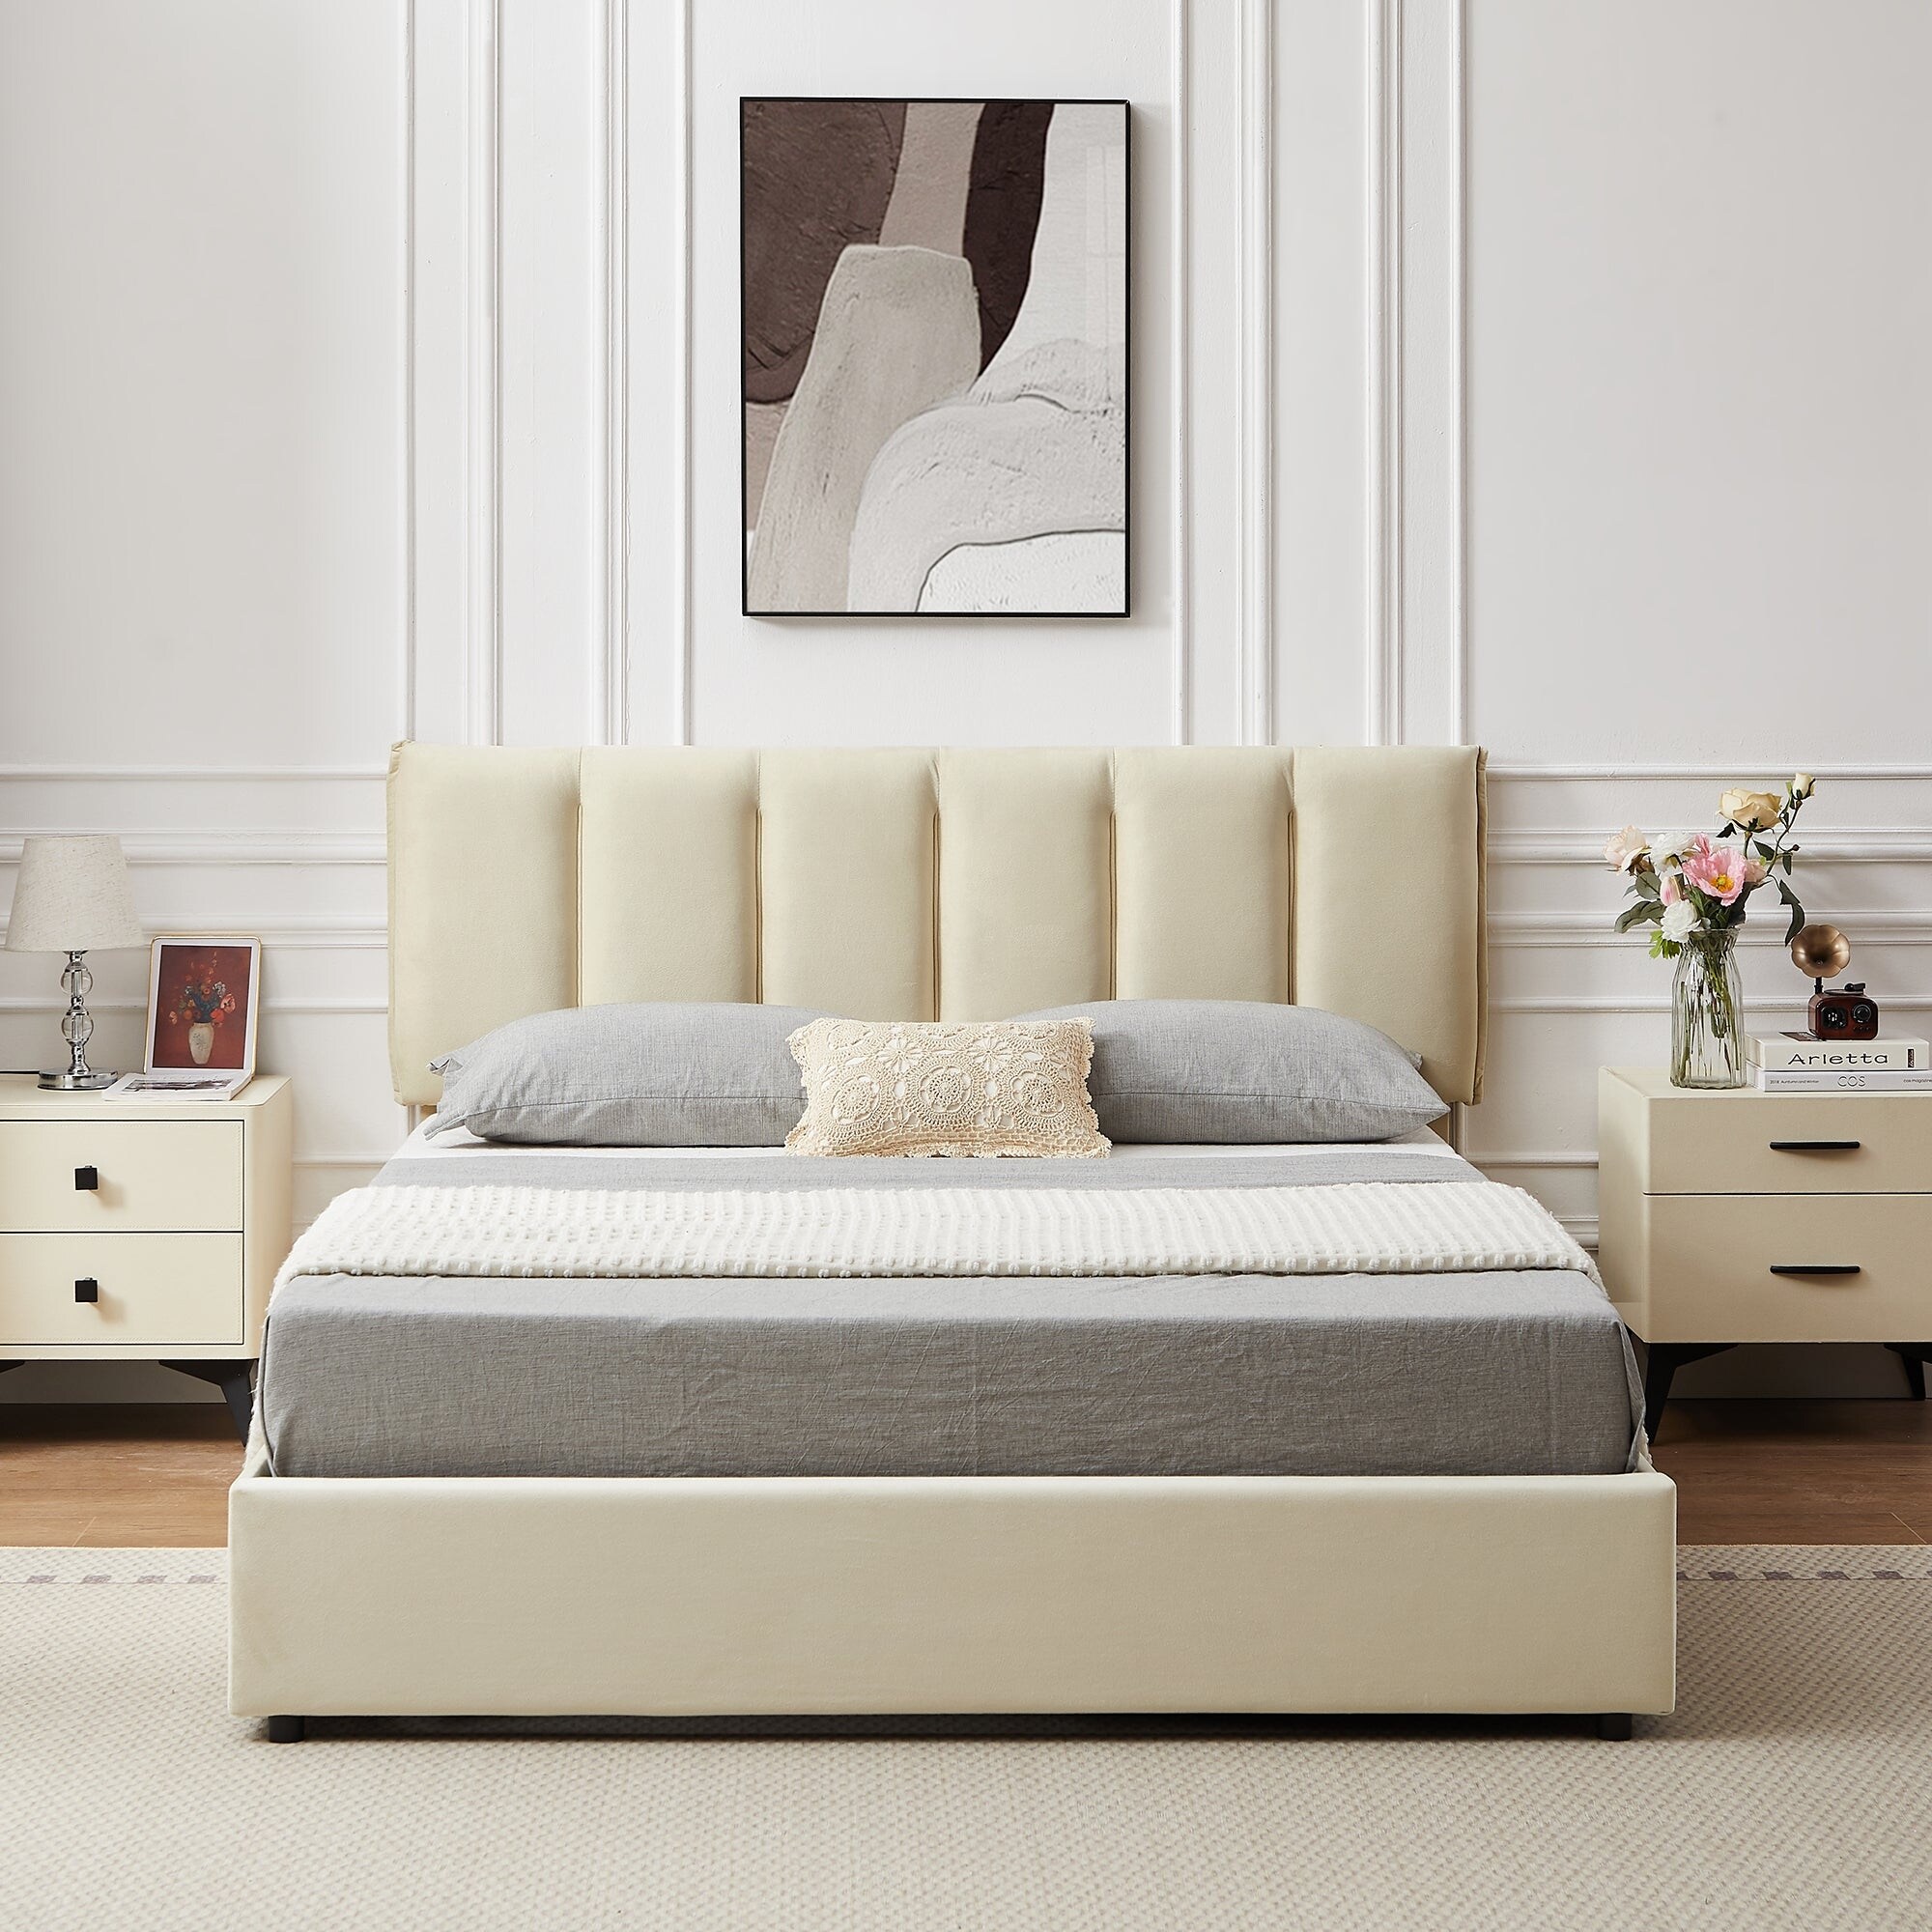 Upholstered Platform Bed Frame with 4 Drawers, Headboard and Footboard  Metal Support, No Box Spring Required, King/Queen/Full - Bed Bath & Beyond  - 38368955